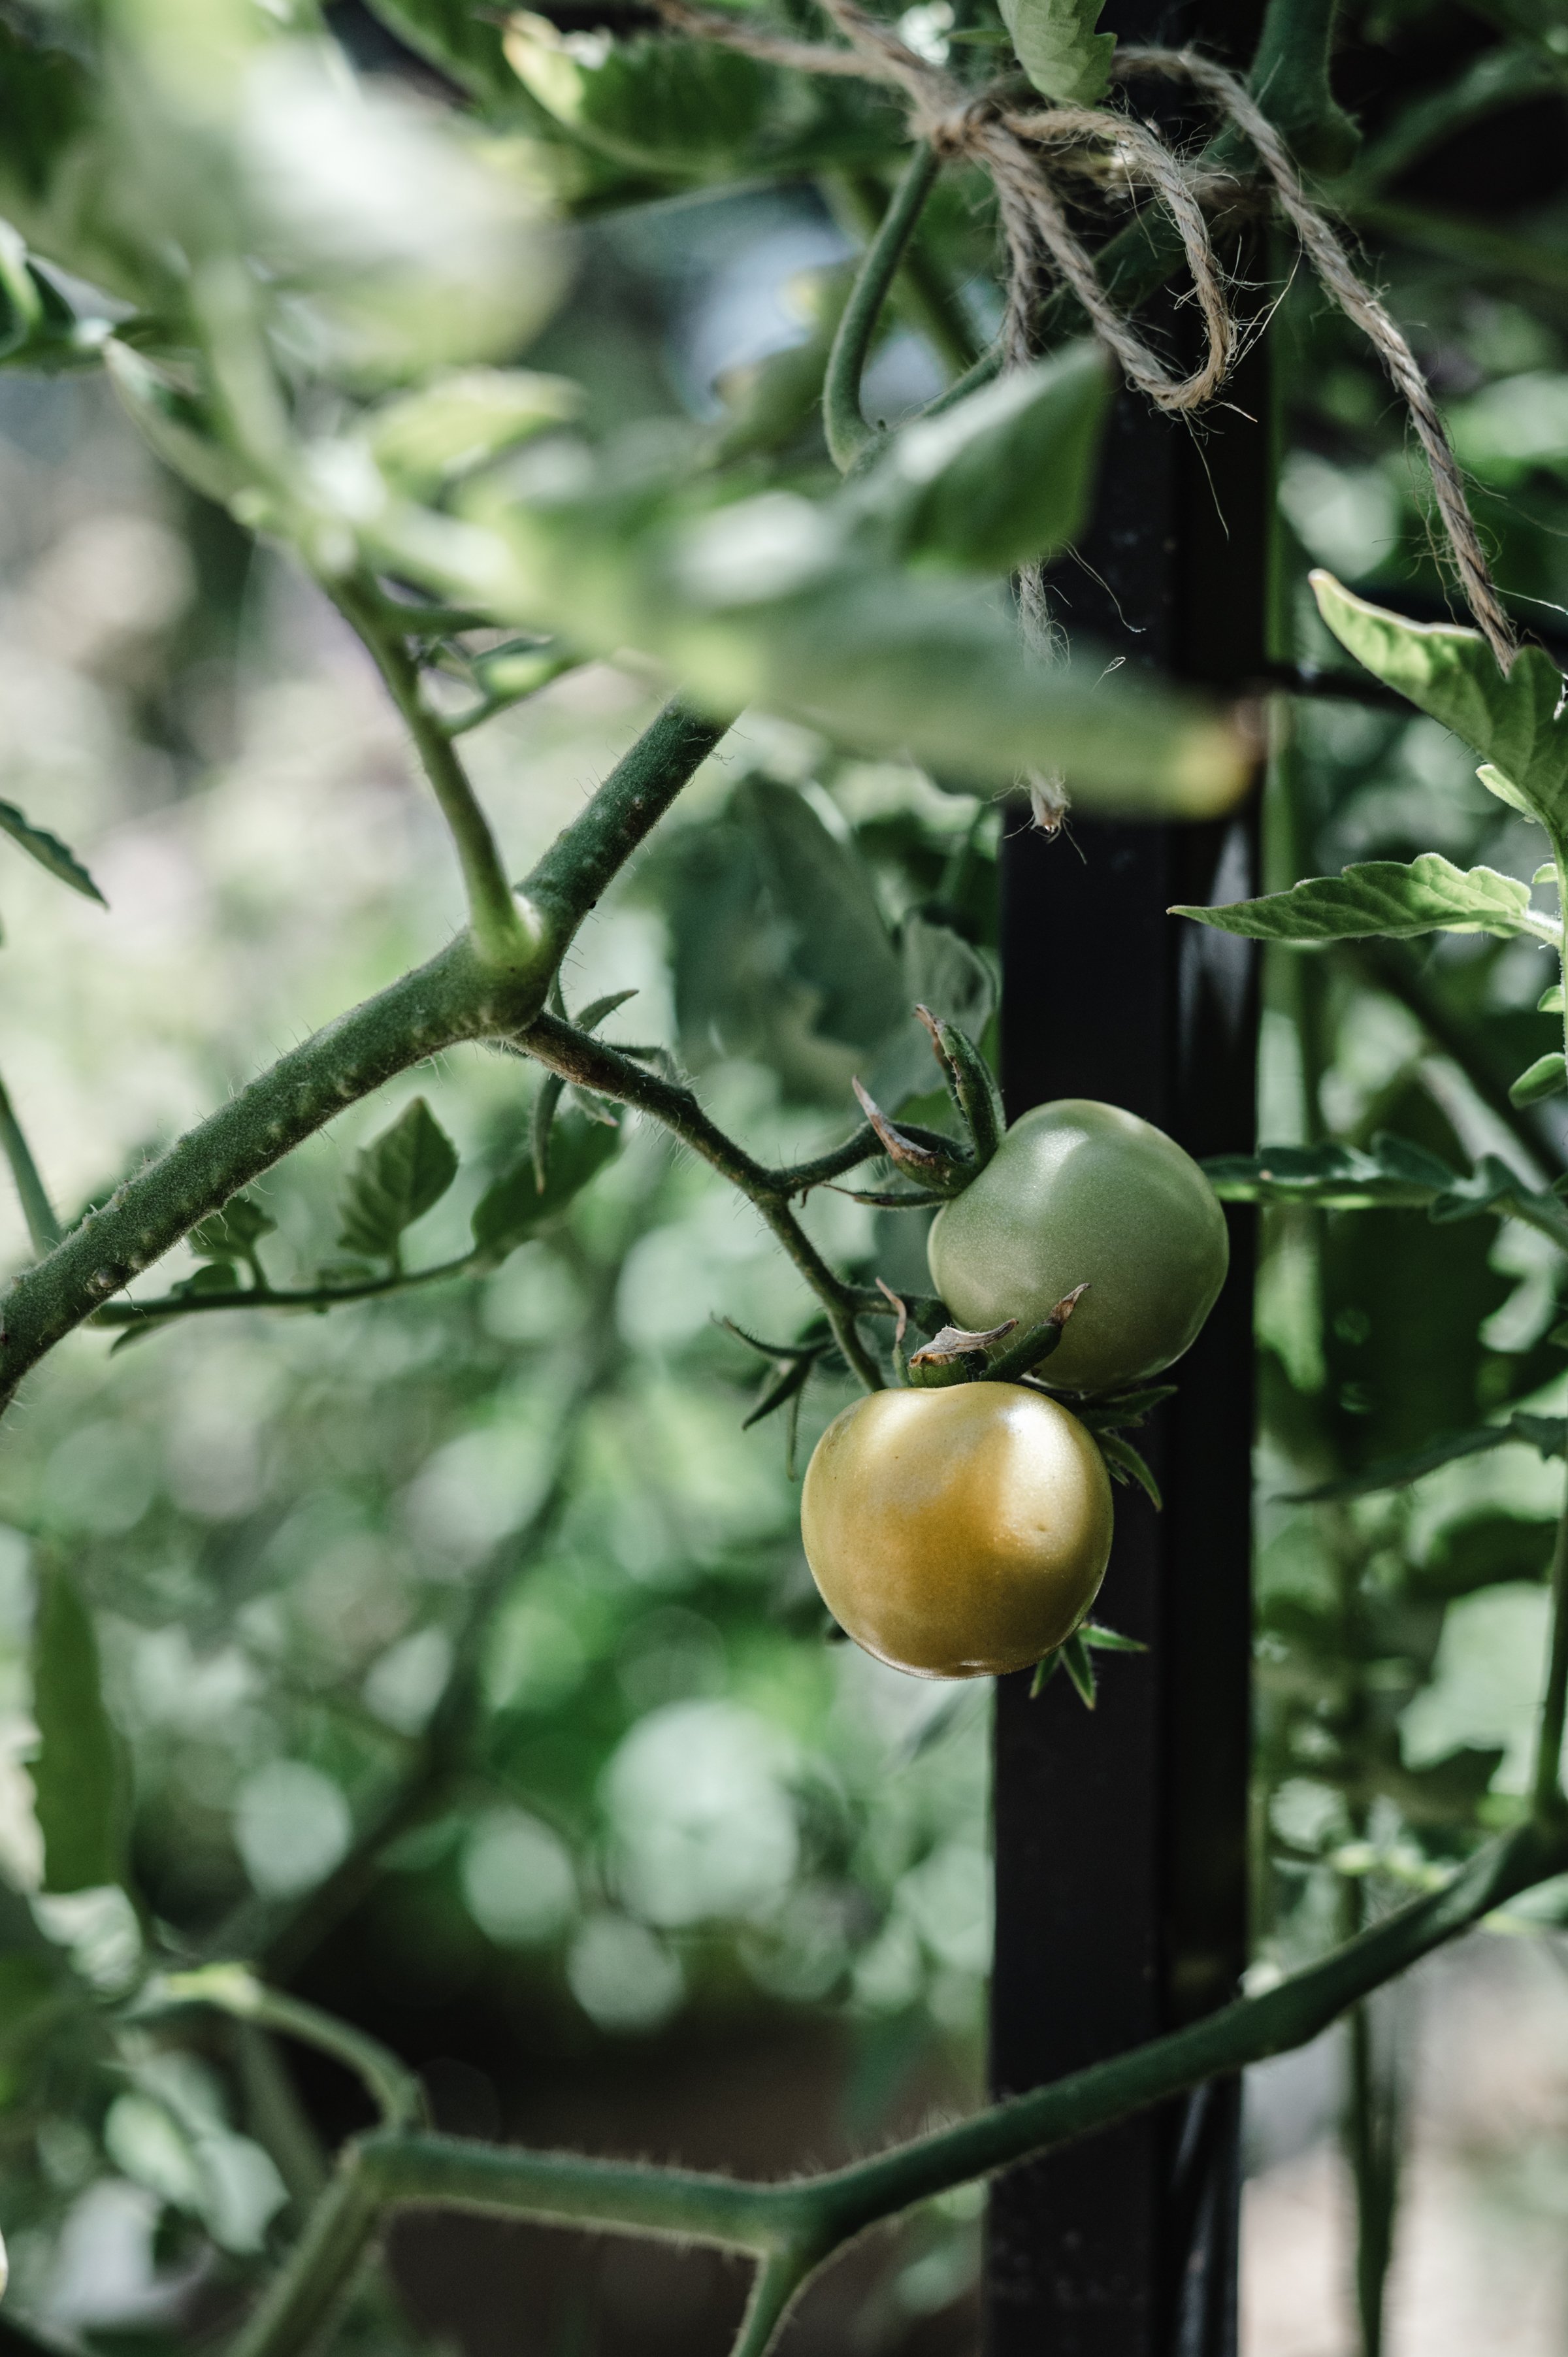 How To Grow And Care For Cherry Tomatoes